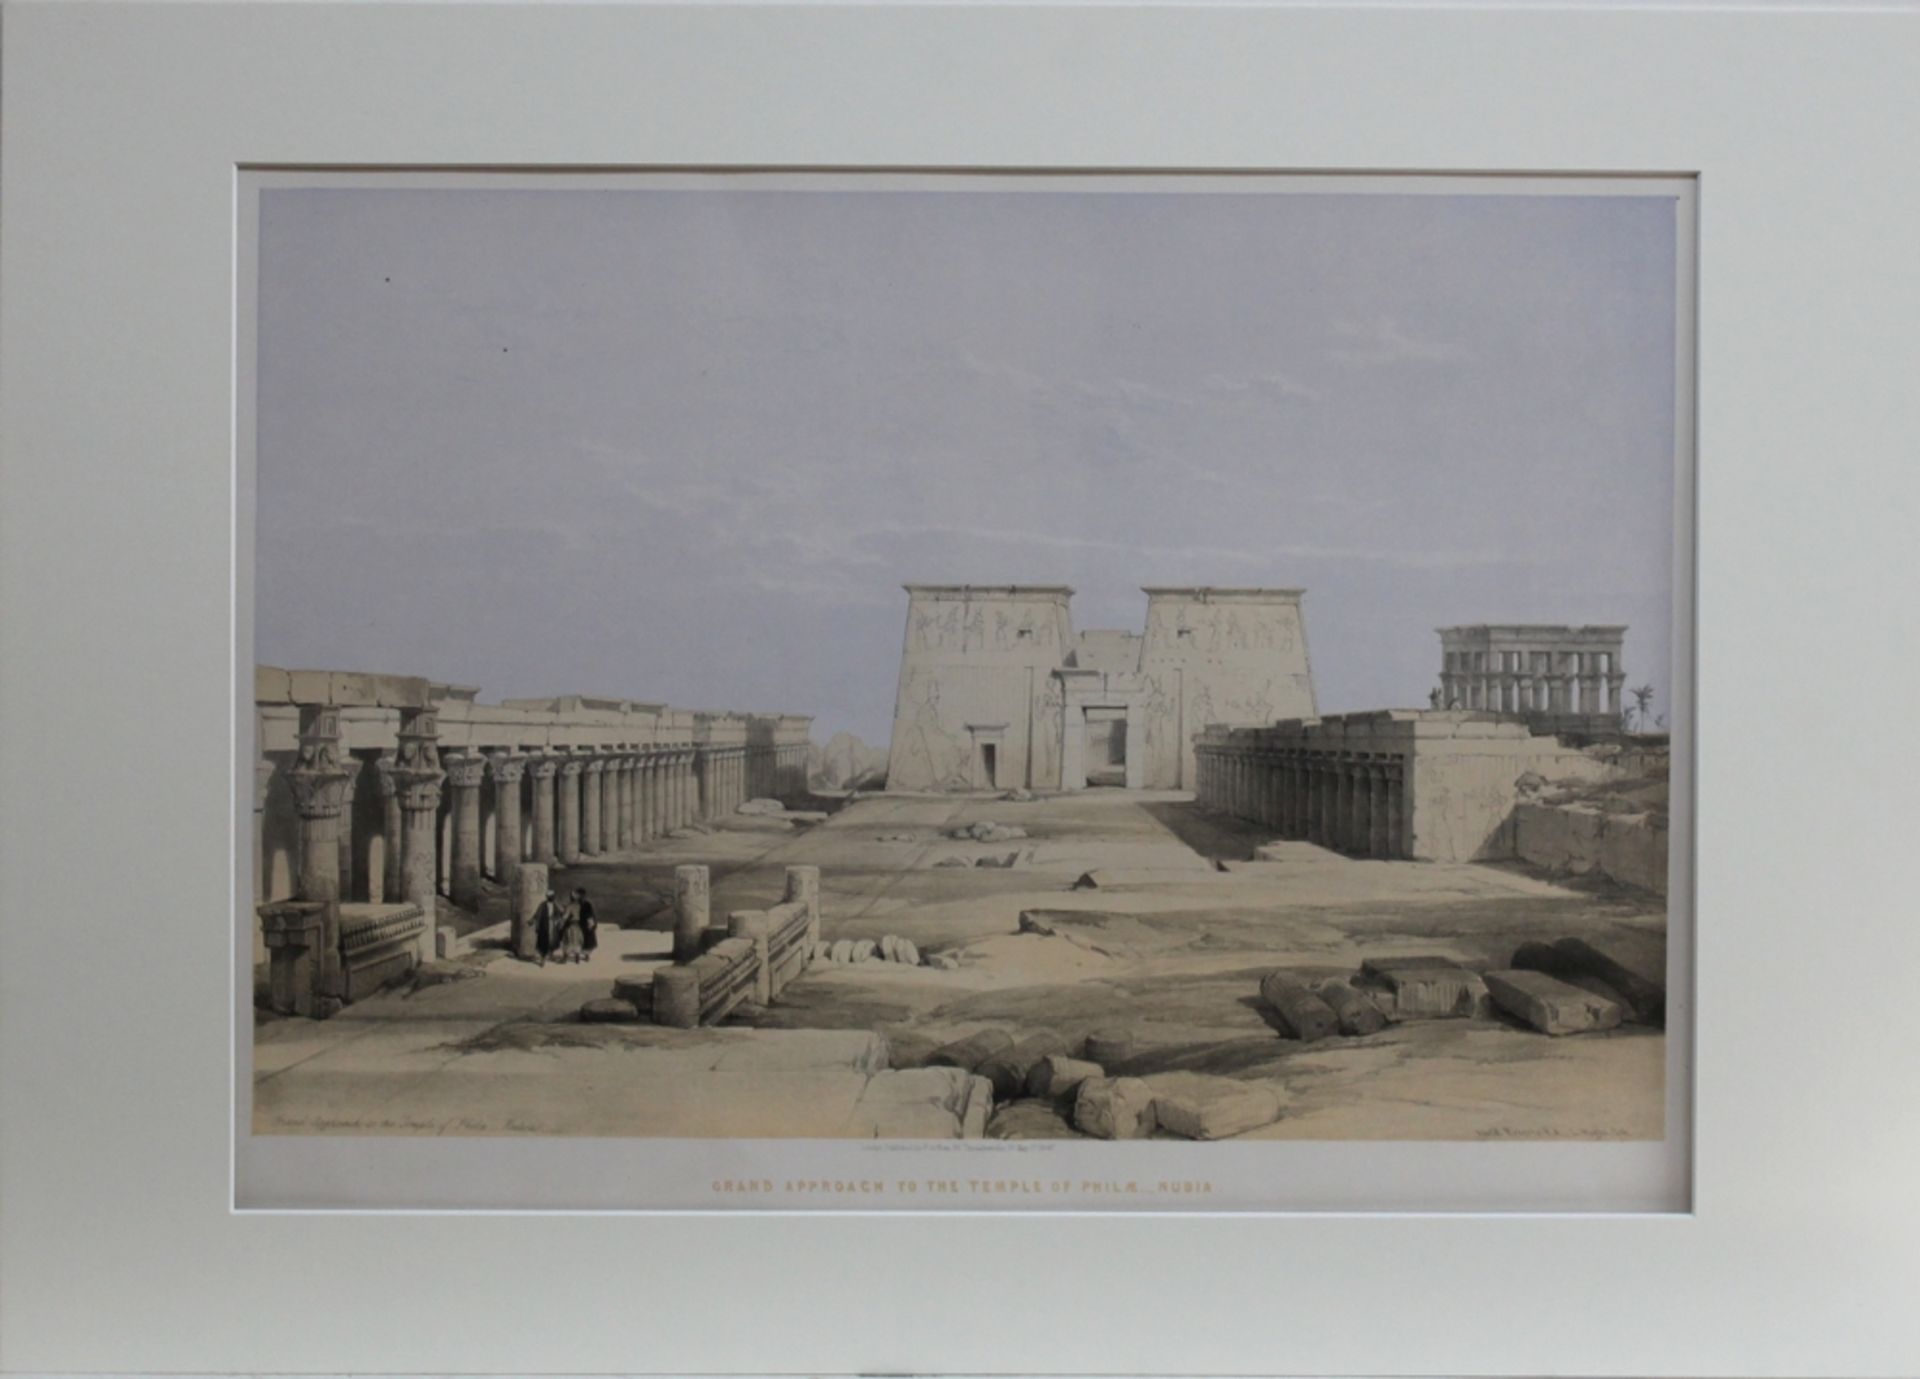 Ägypten. Philae. “Grand approach to the temple of Pilae - Nubia”. Getönte Lithographie von Louis